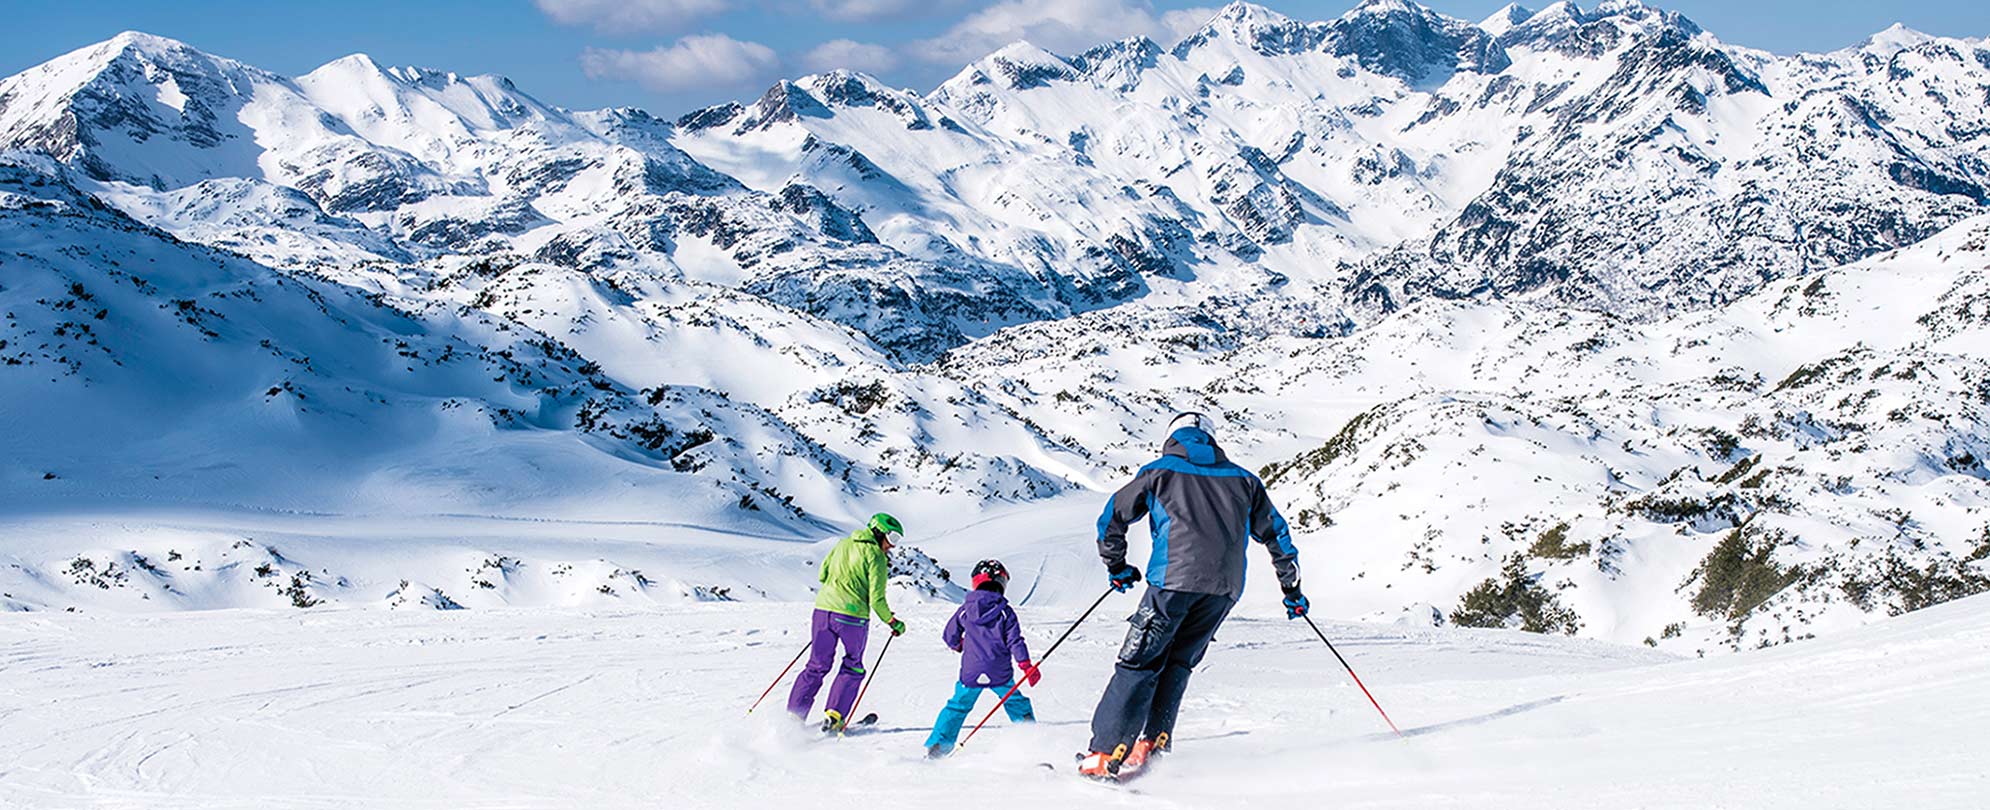 A dad and two kids skiing in Whistler, Colorado, with the snowy mountains in the background.